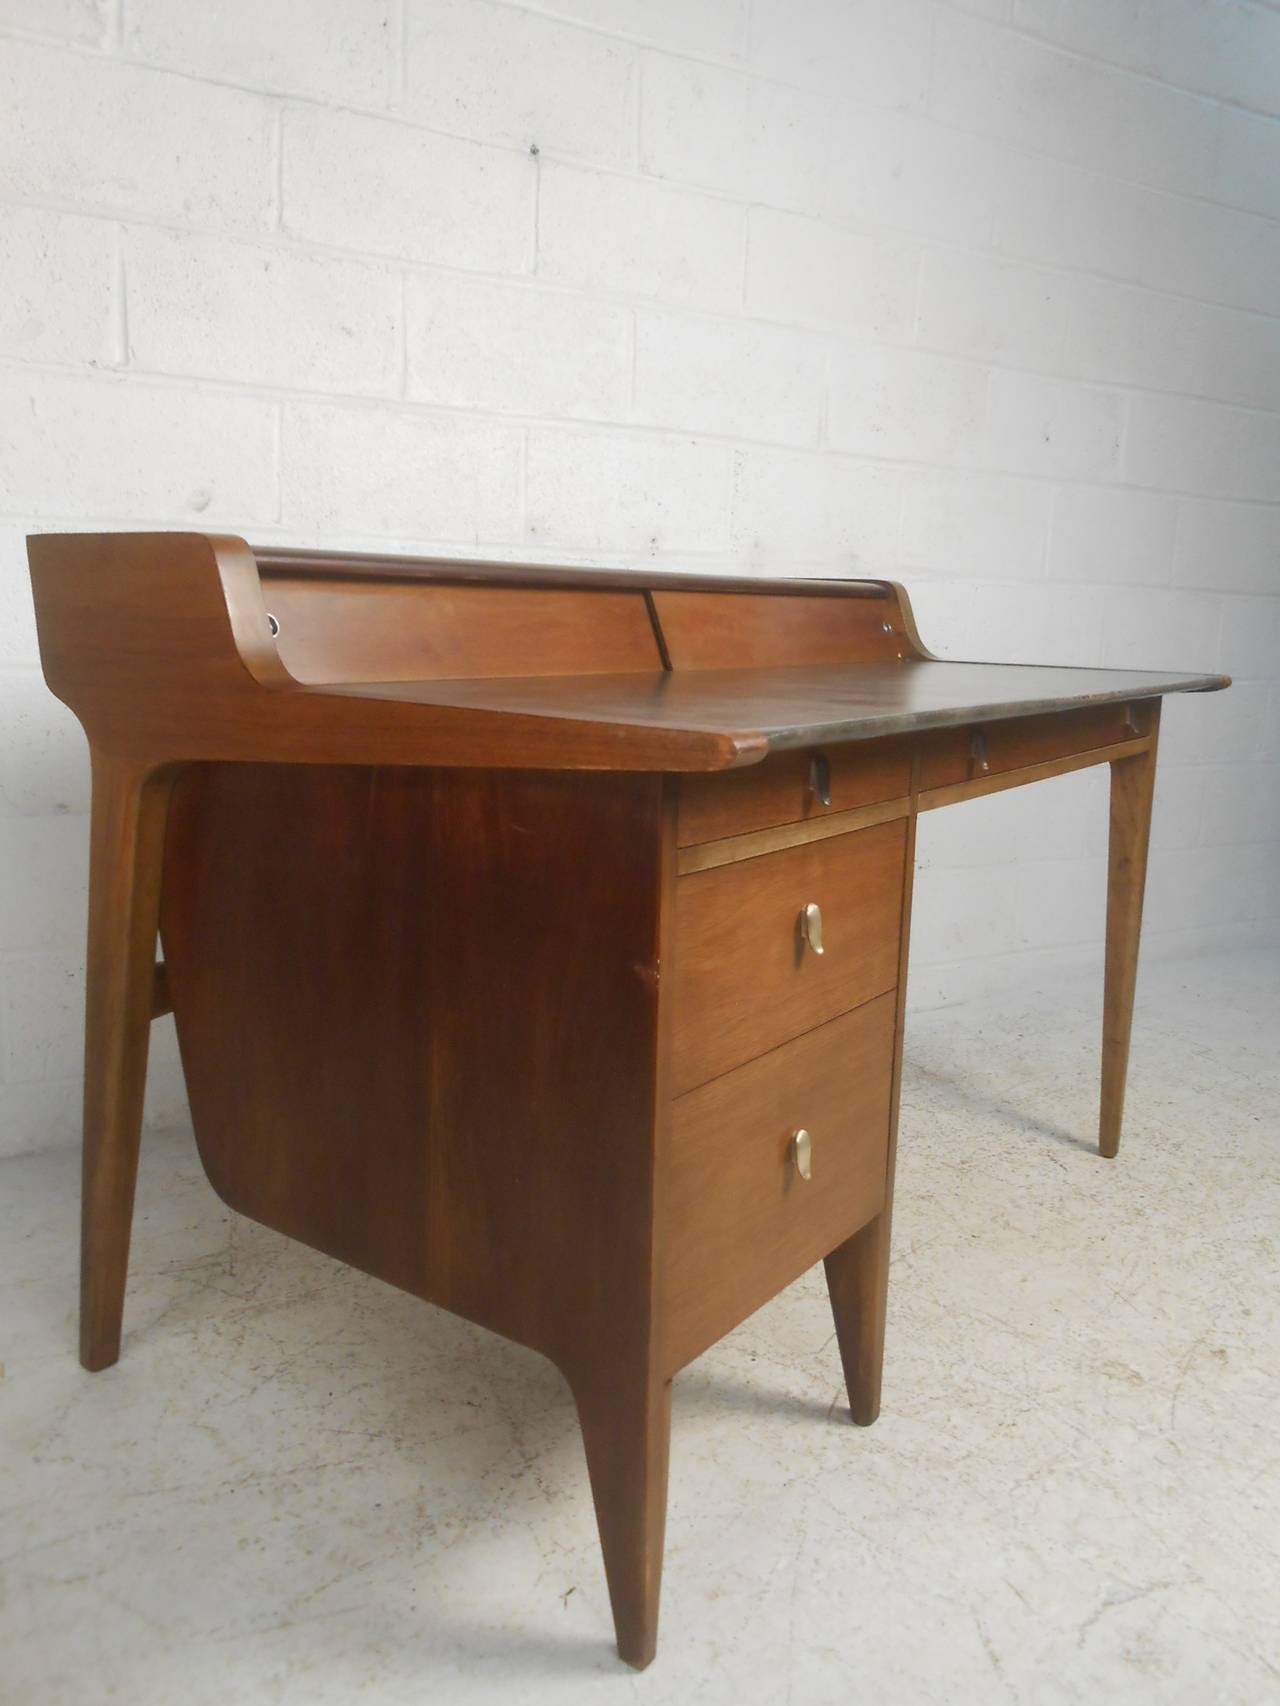 Gorgeous finished back desk with faux leather top and matching chair designed by John Van Koert for Drexel. Great modern design with sliding panel storage, four drawers, silver plated pulls, and a beautiful sculpted back.

(Please confirm item